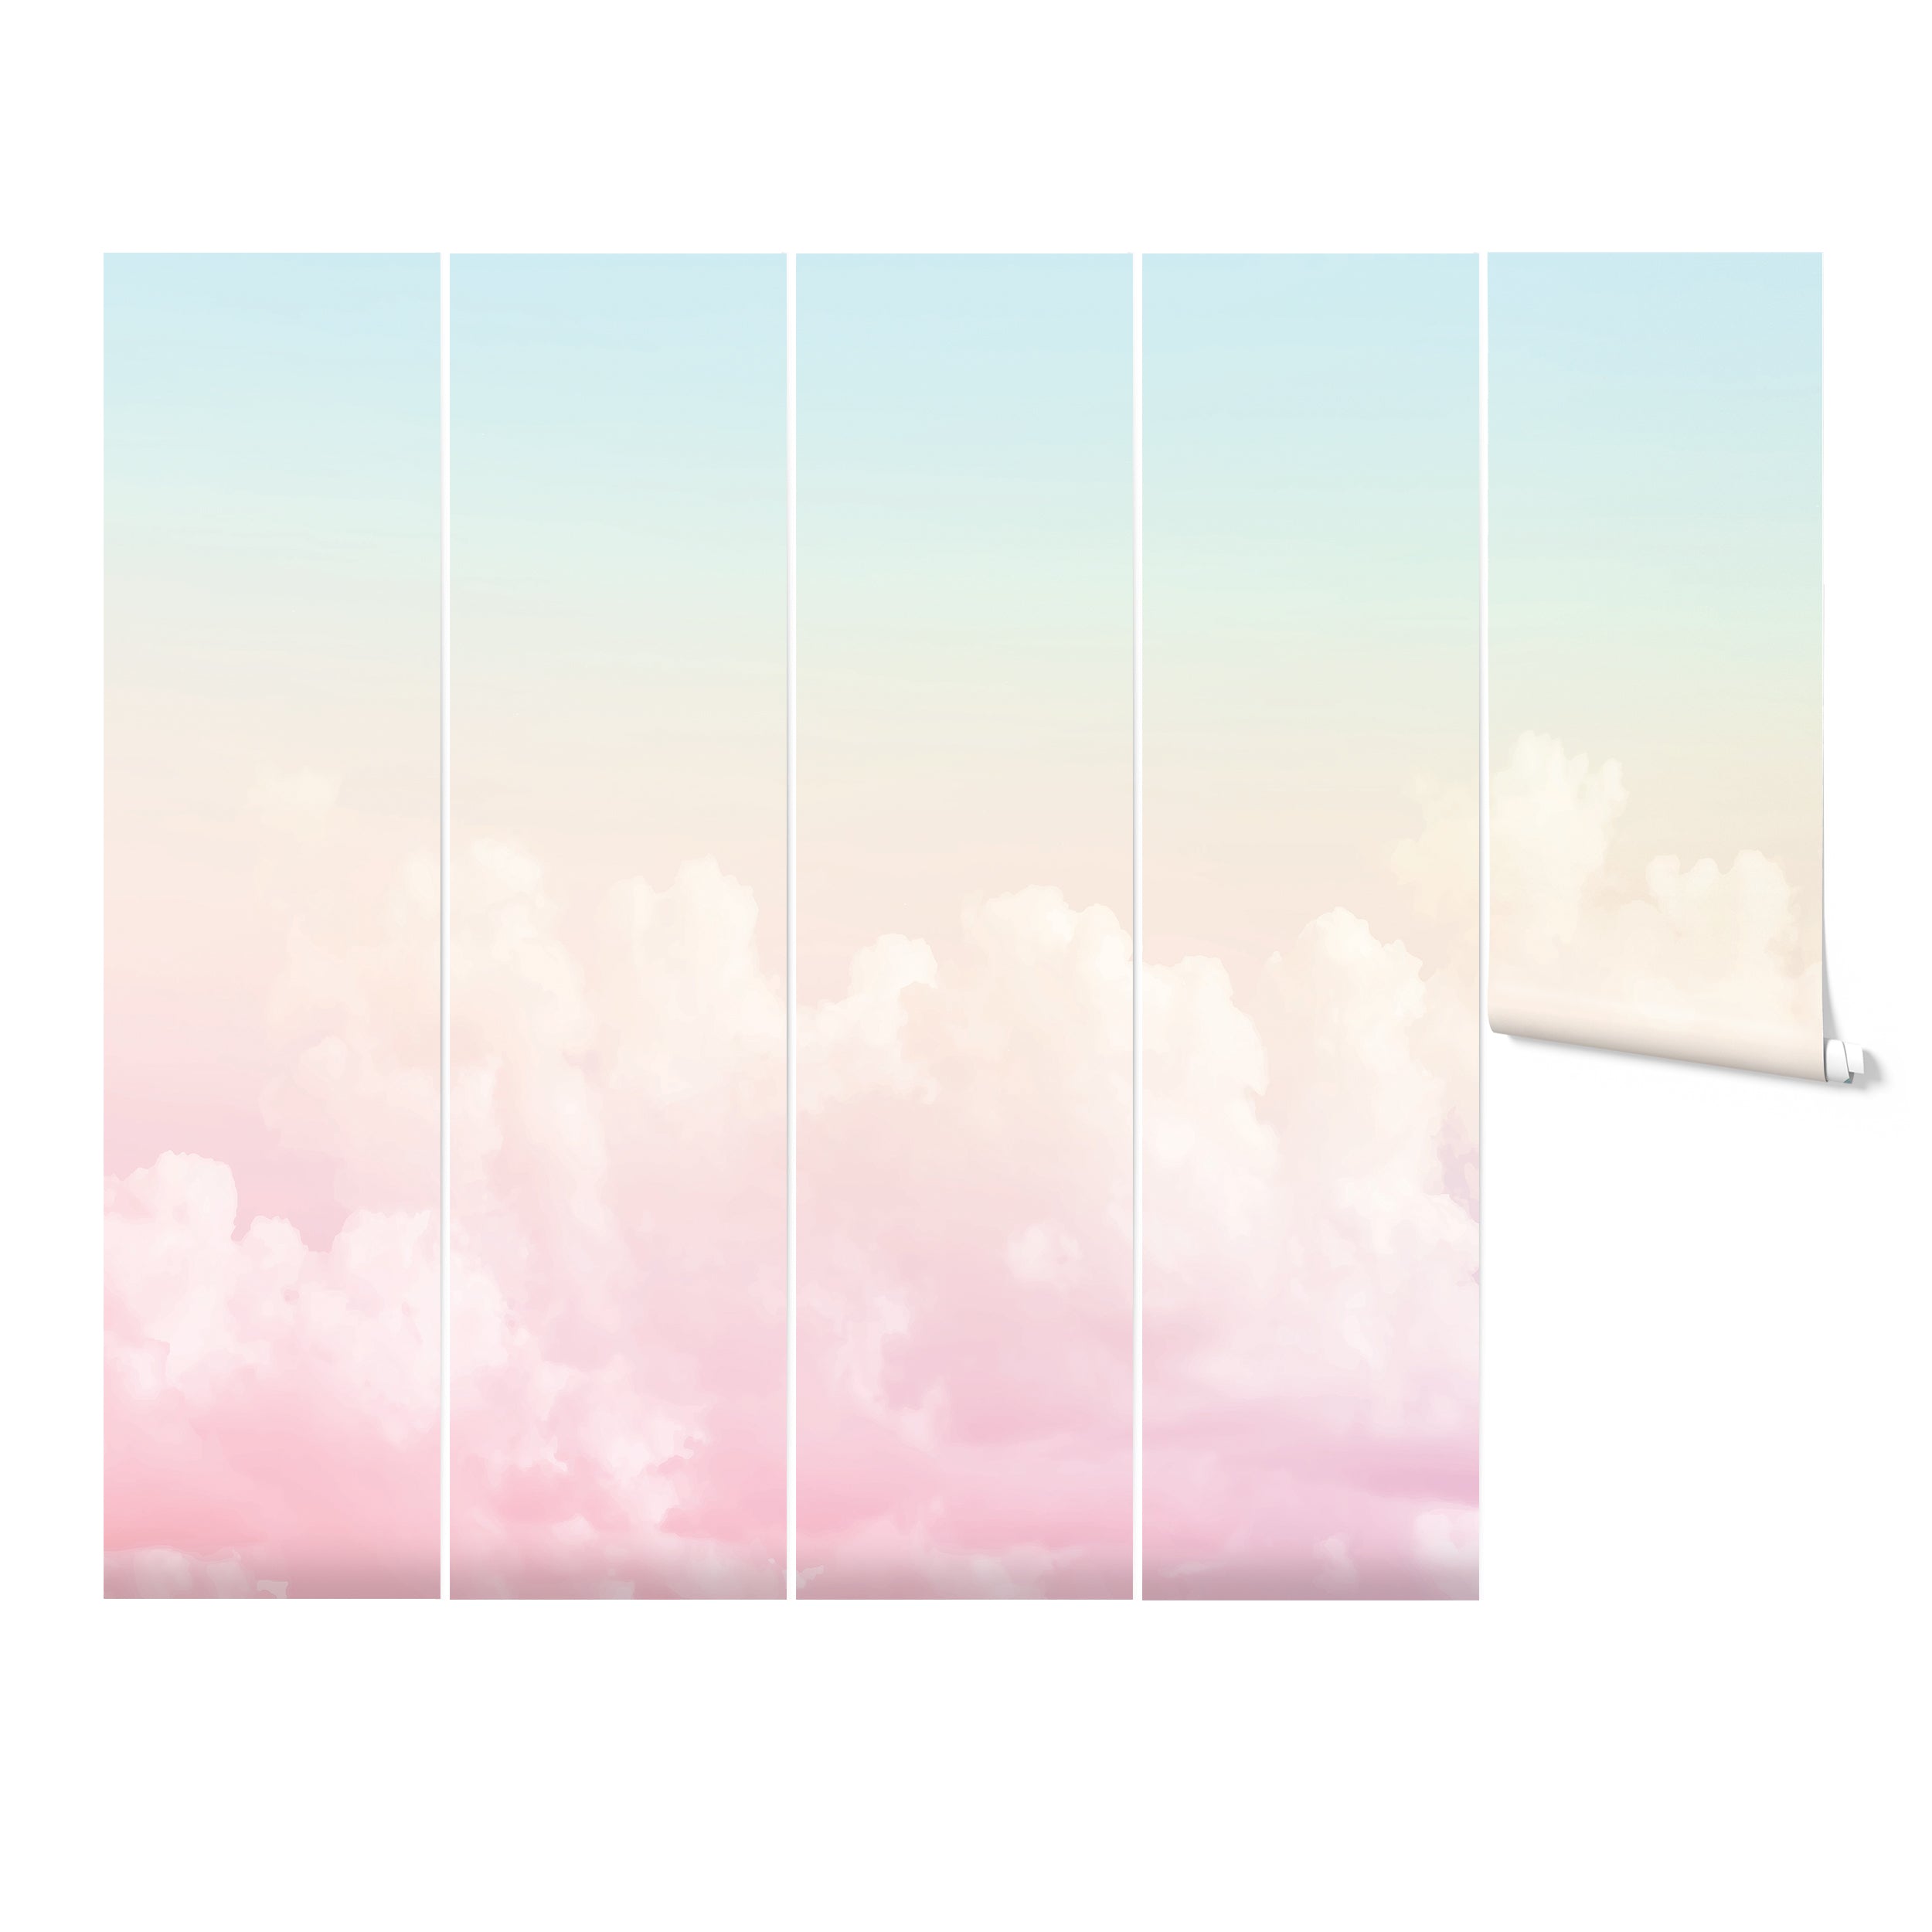 Panels of Pastel Sky Mural Wallpaper showing a seamless transition from pink to blue with fluffy clouds